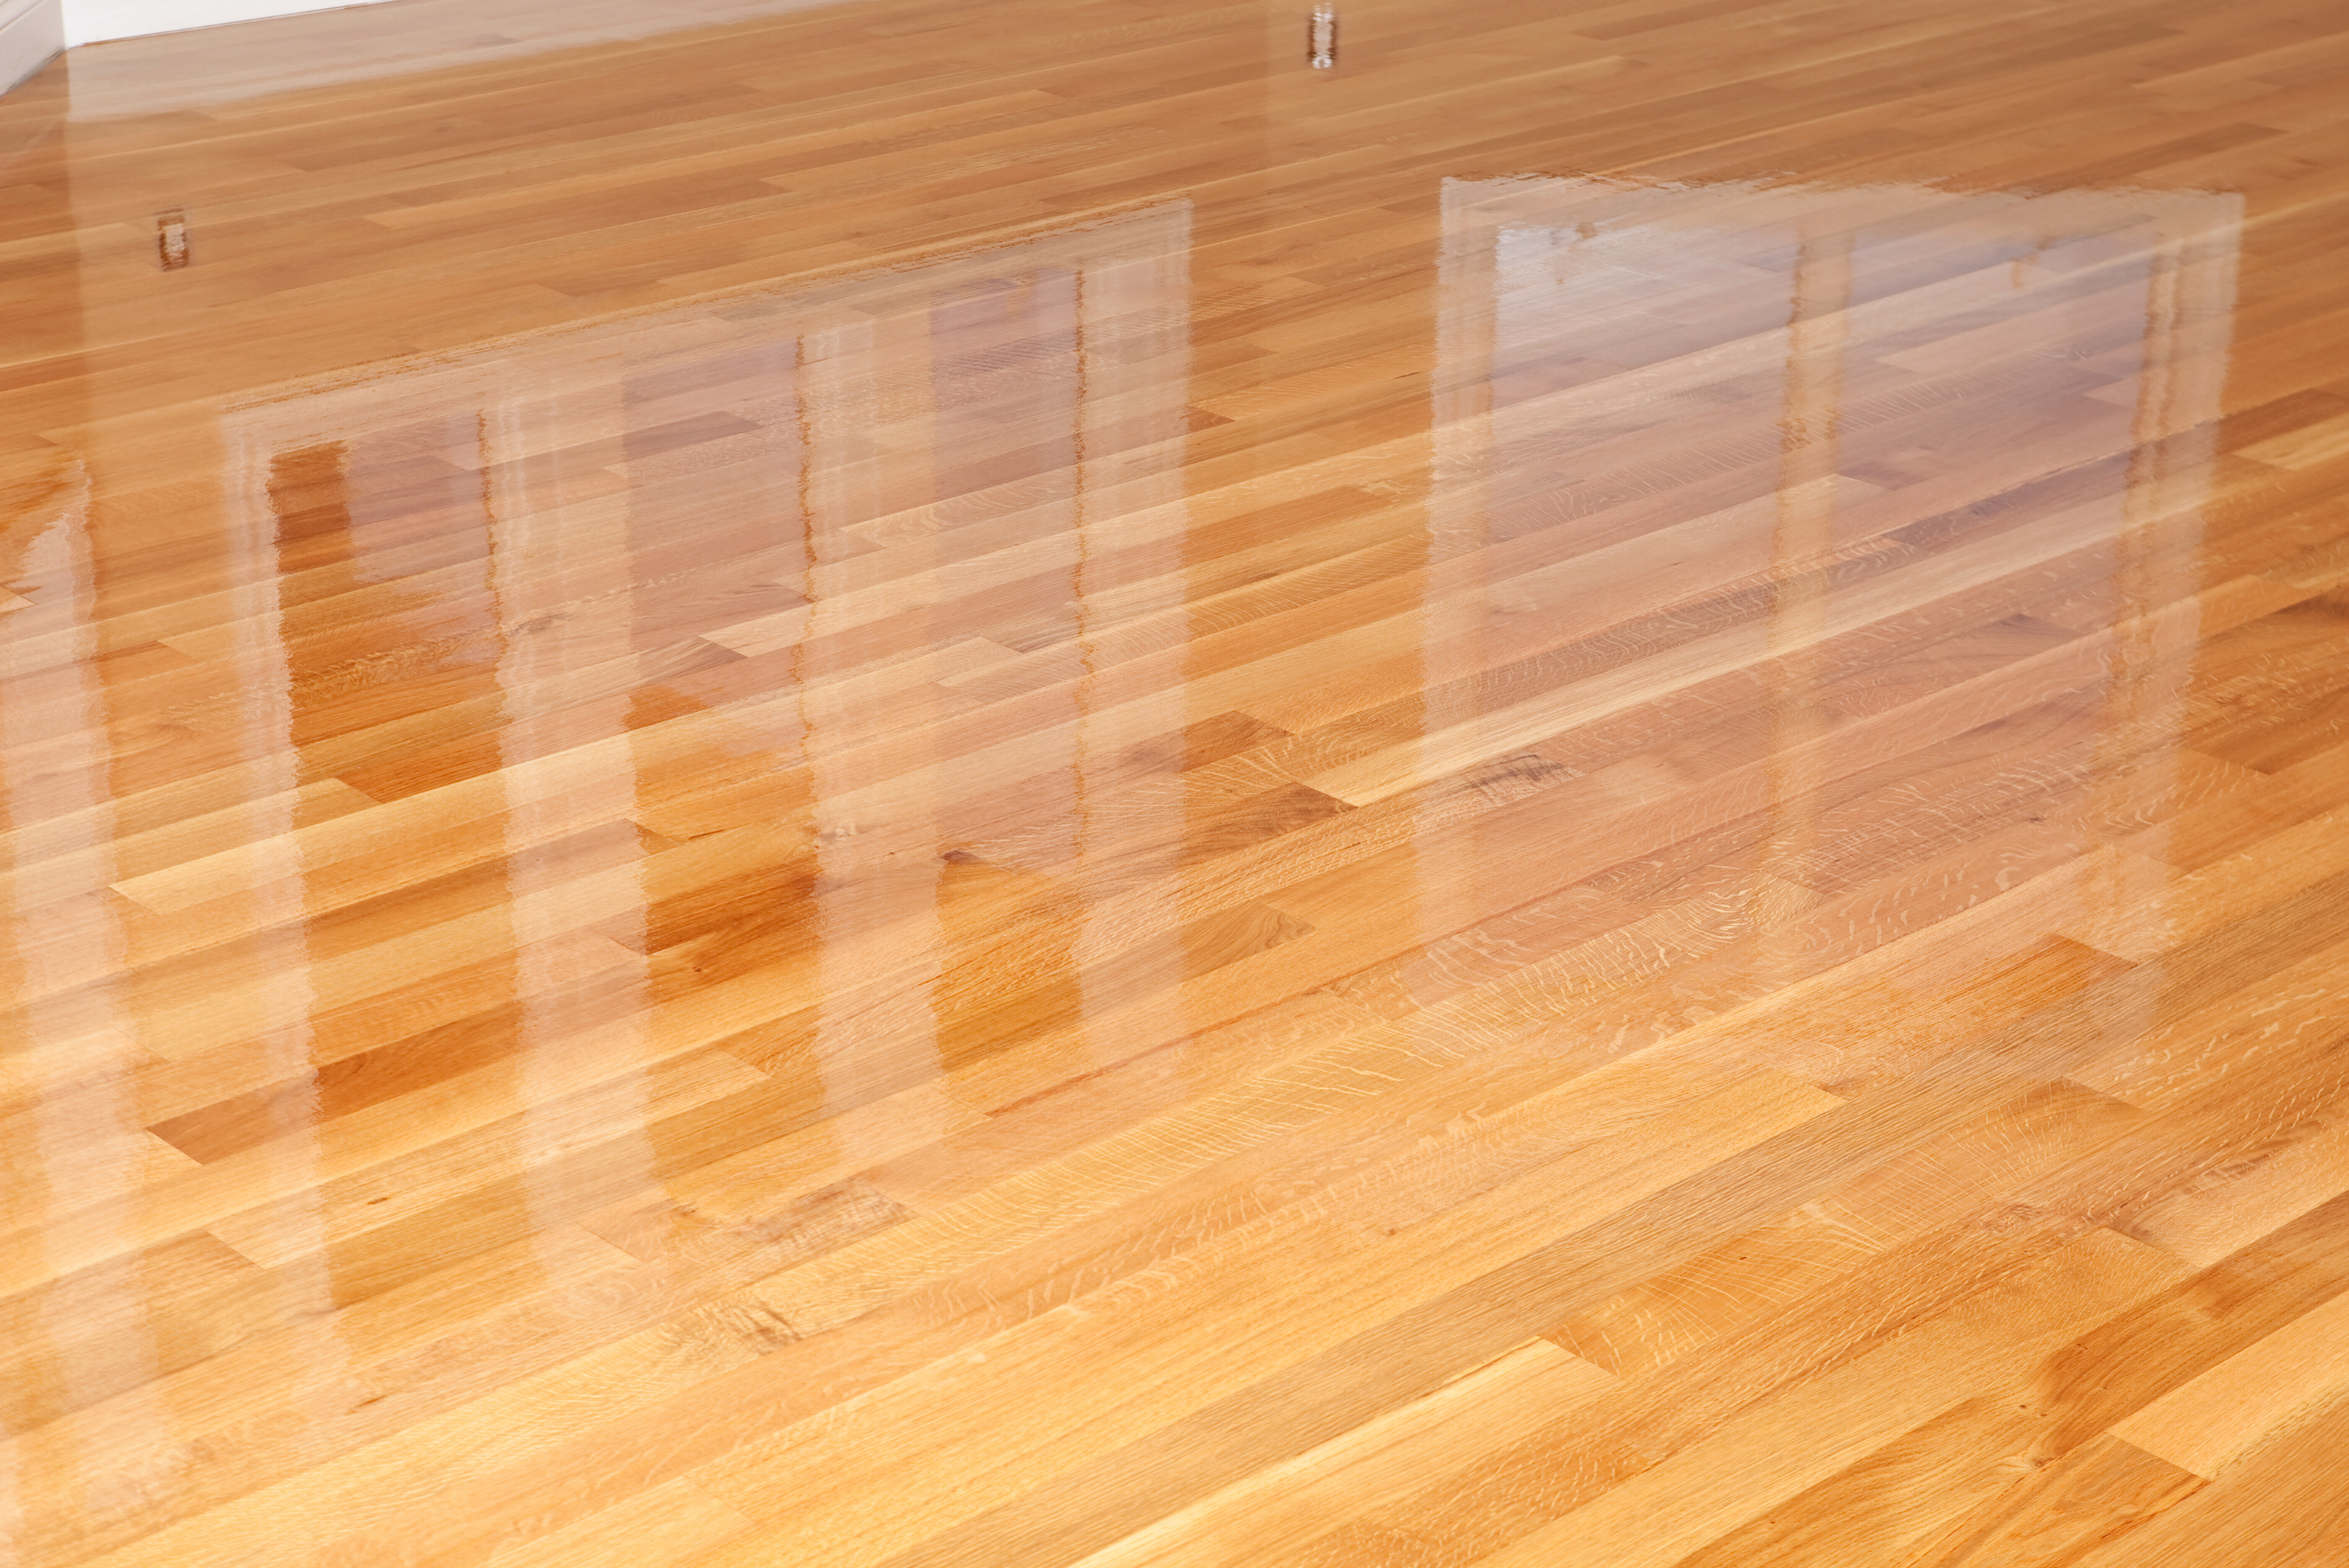 A polyurethane finished wooden floor.